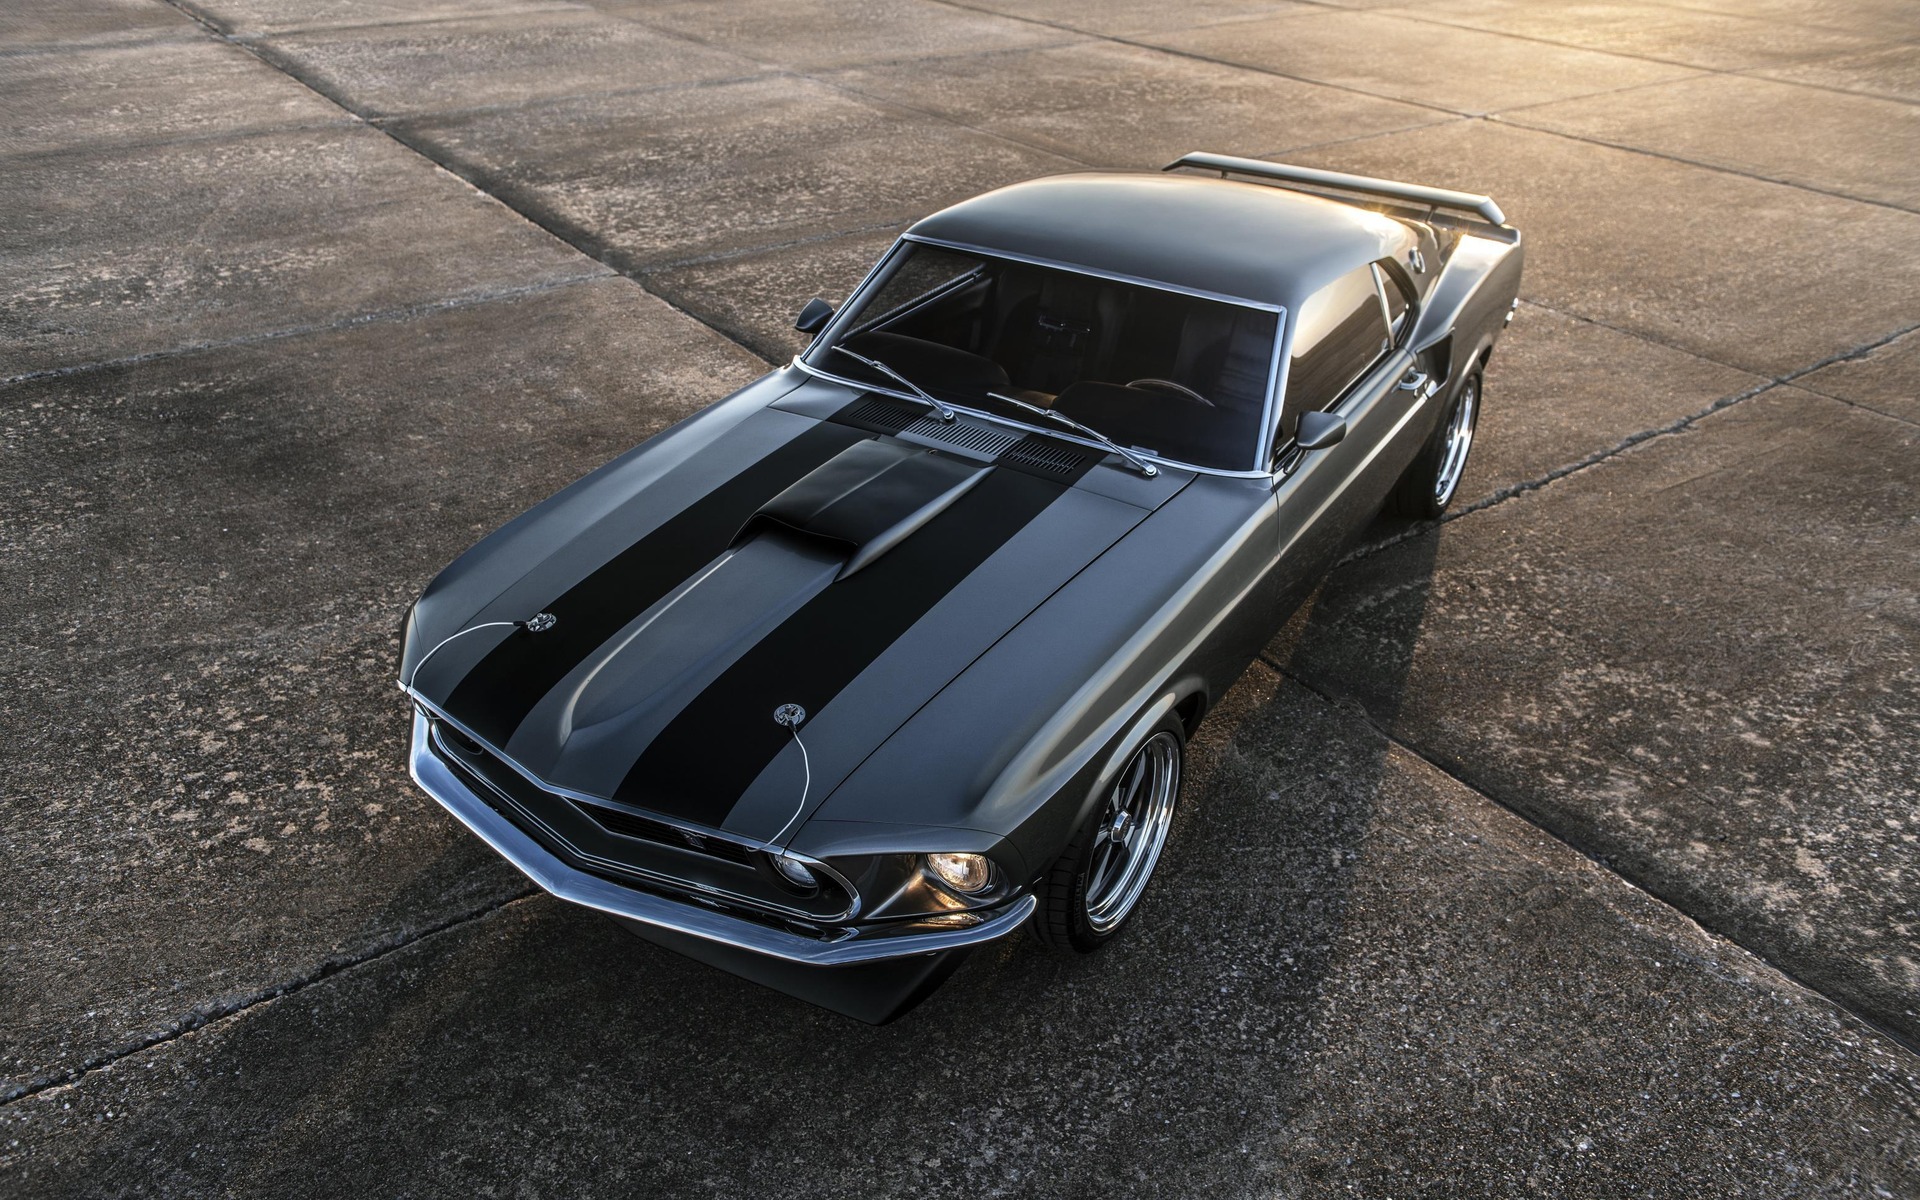 Voici Hitman, une Ford Mustang 1969 de 1000 chevaux! 410595_Ford_Mustang